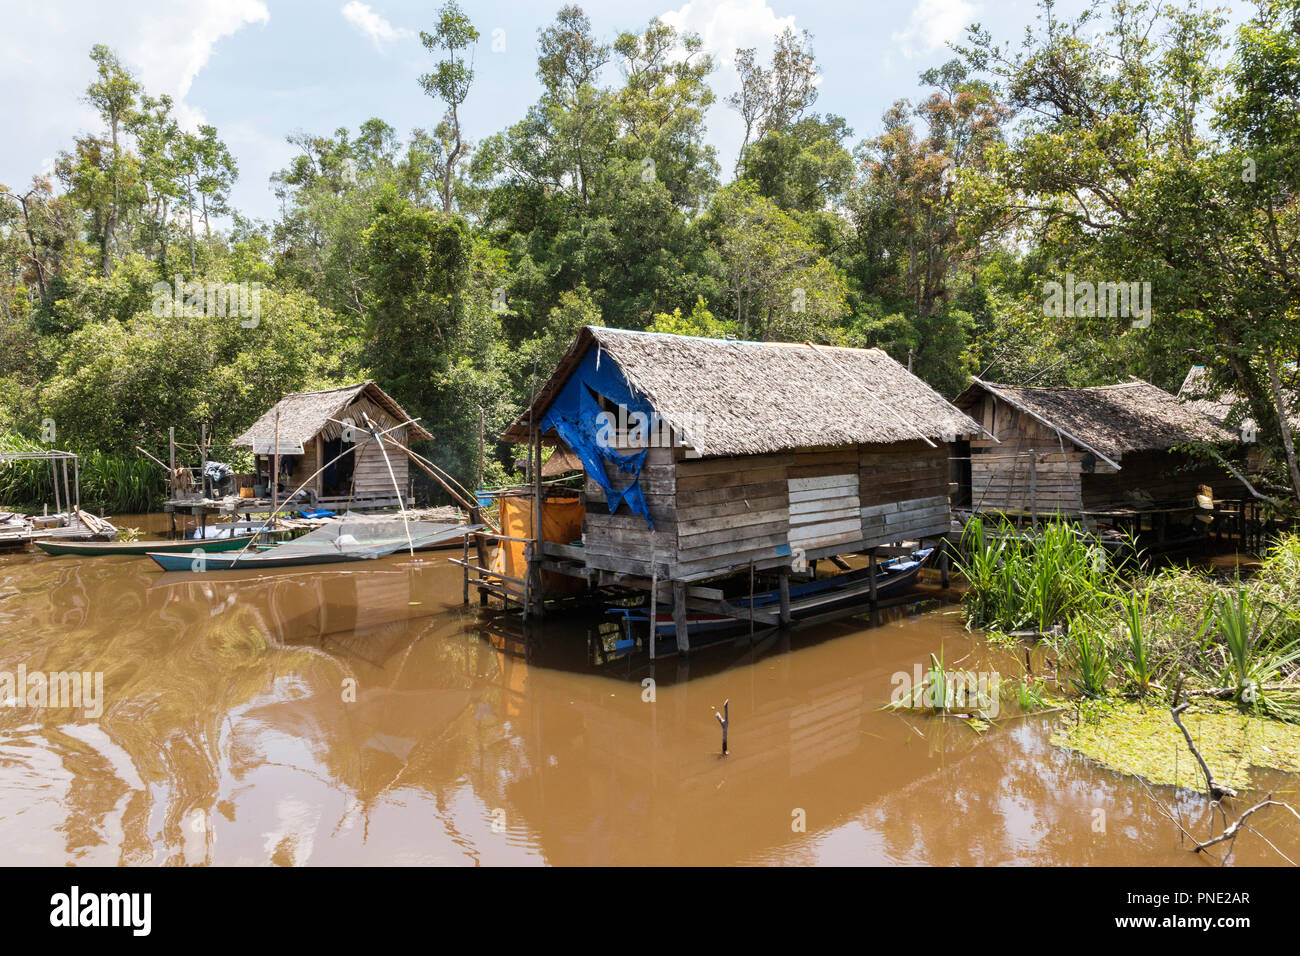 Small fishing village on the Sekonyer River, Tanjung Puting National Park, Borneo, Indonesia. Stock Photo